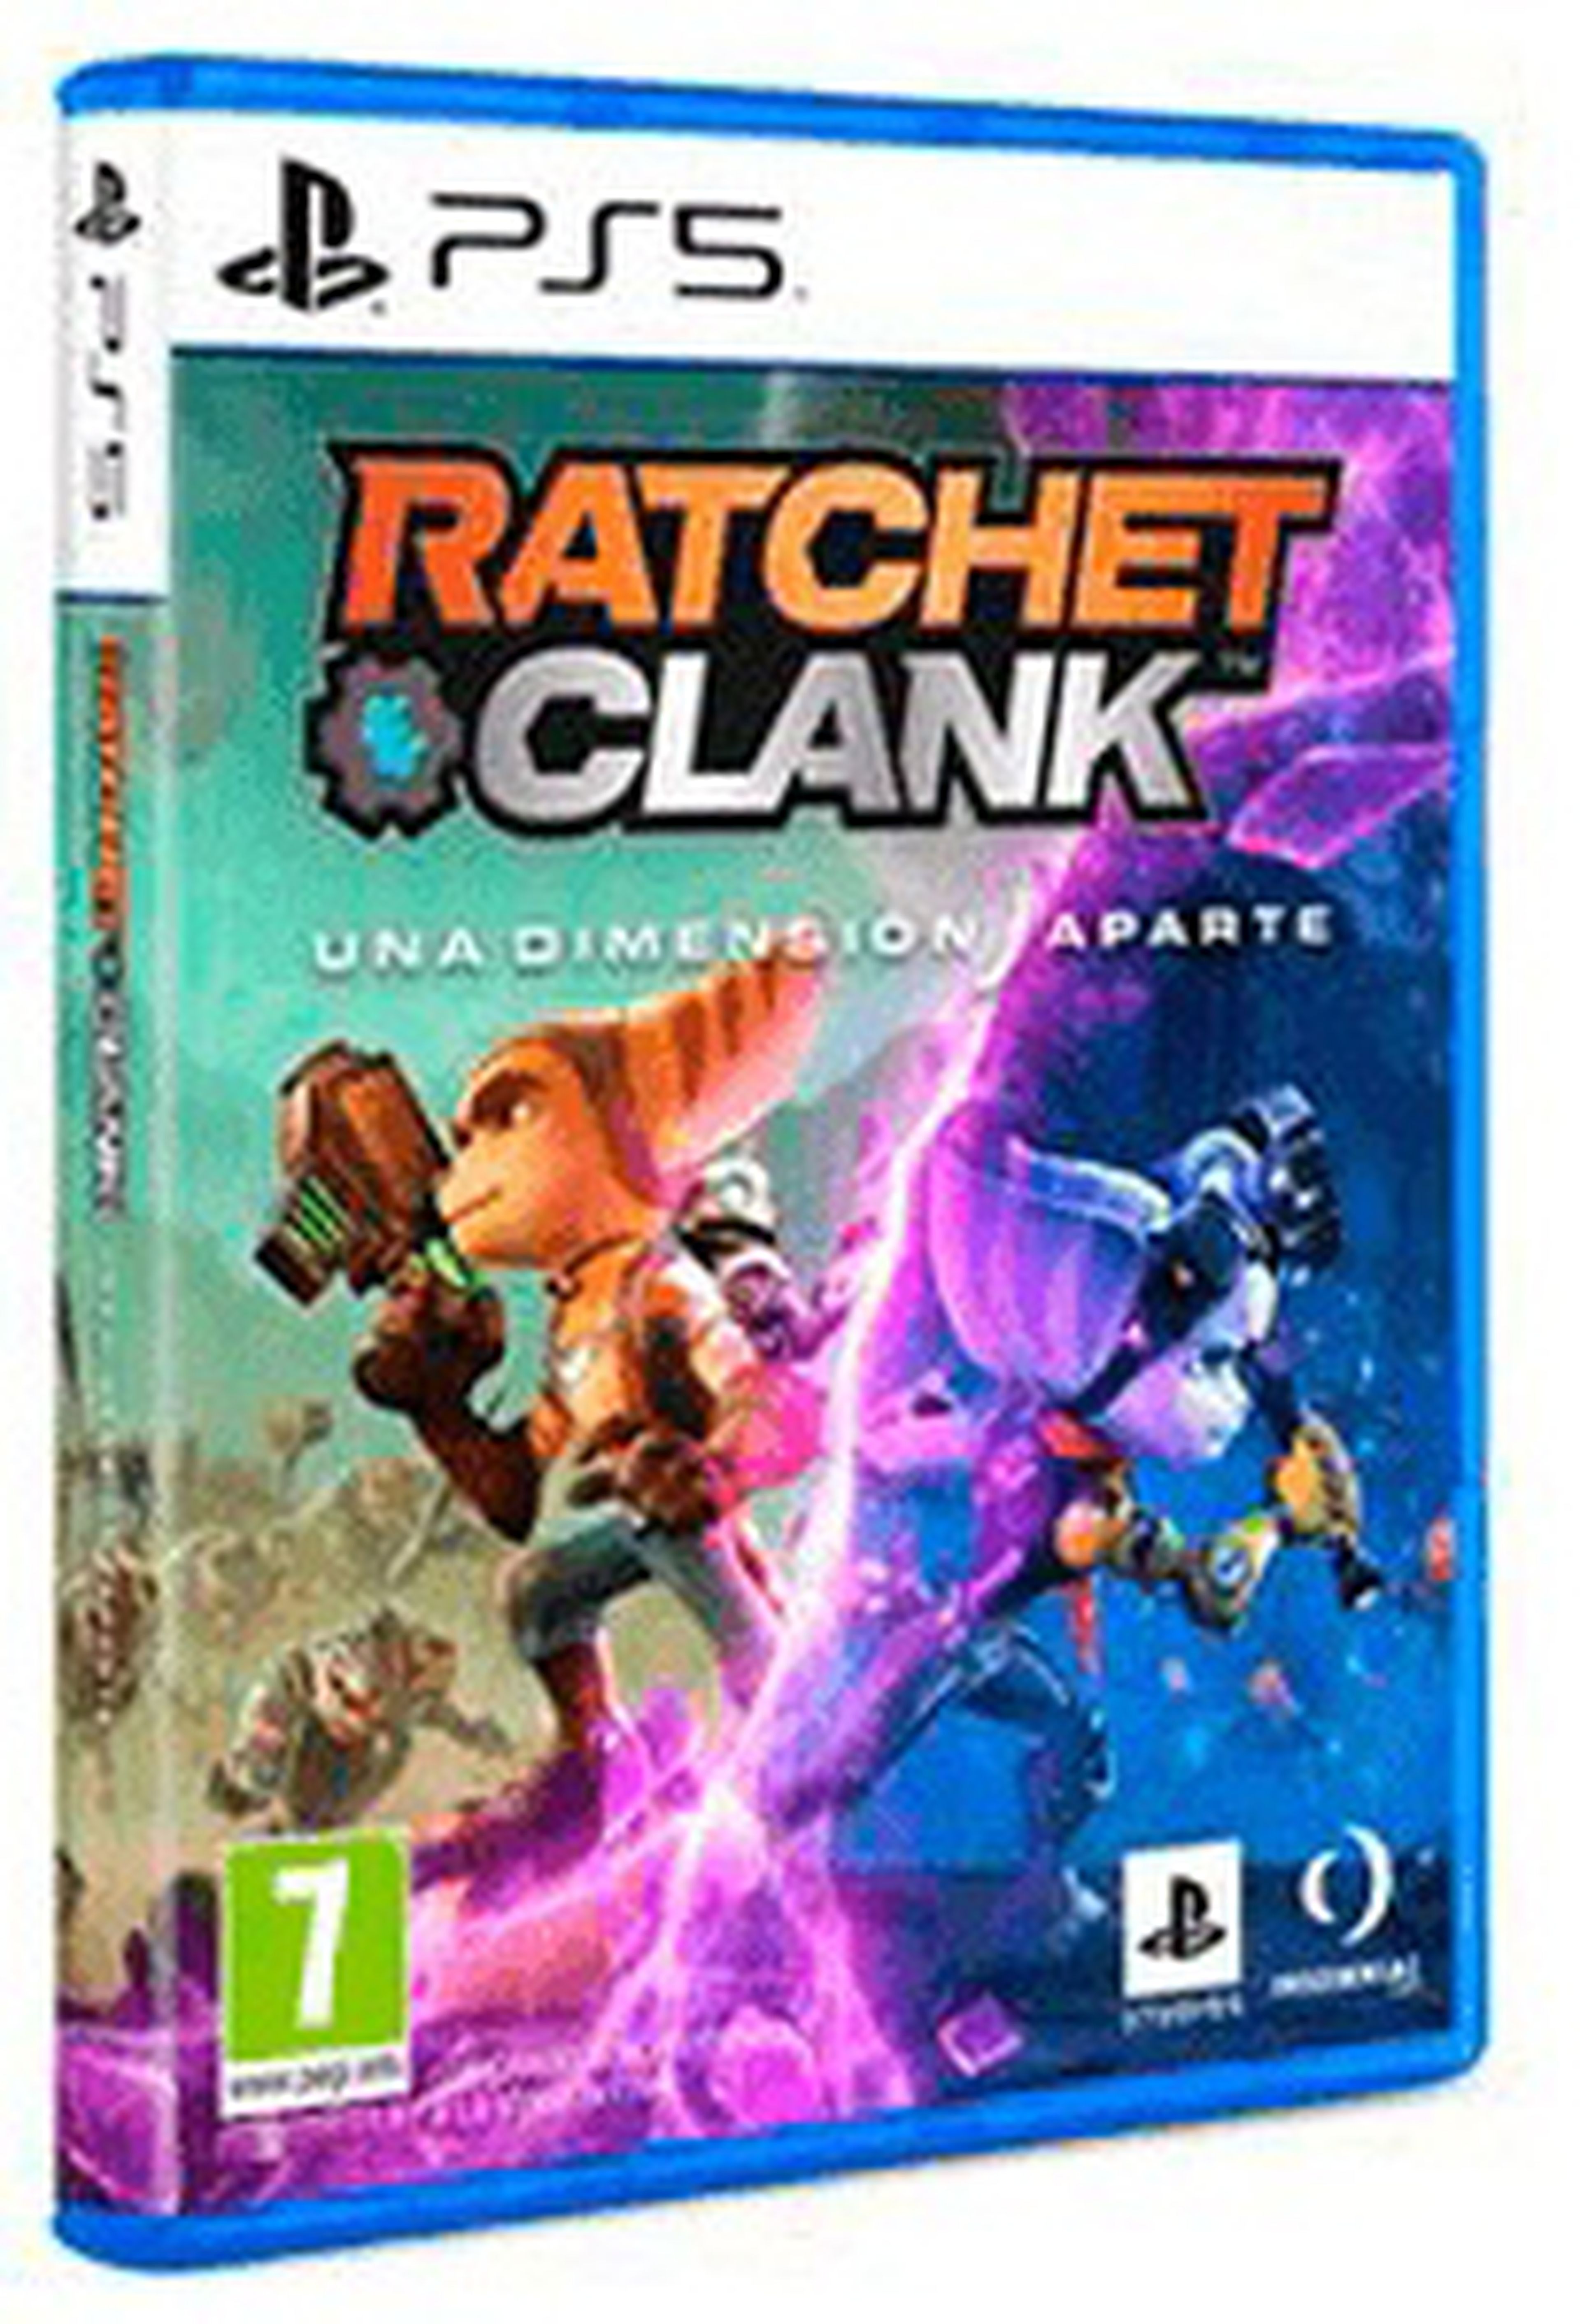 PROMO GAME PS5 HALLOWEEN ratchet clank